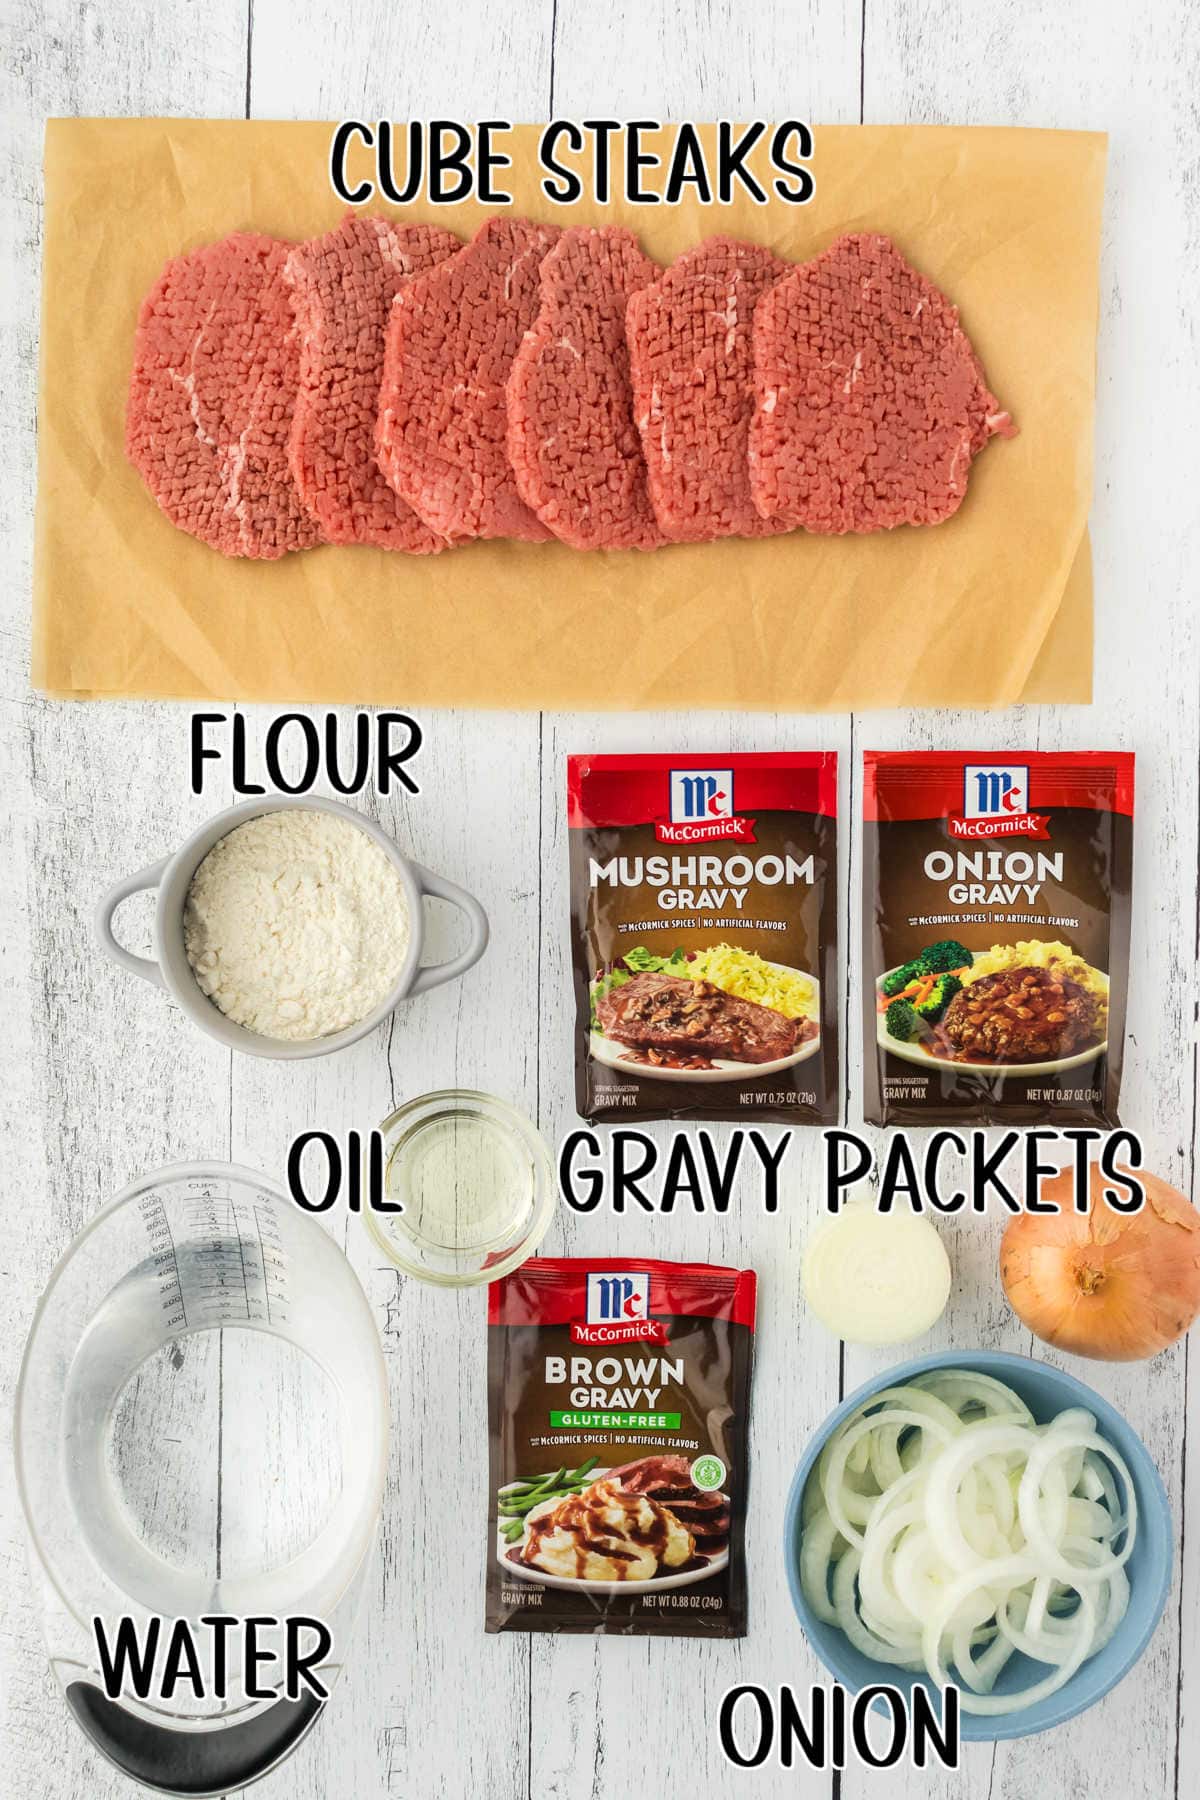 Labeled ingredients for cube steaks and gravy.